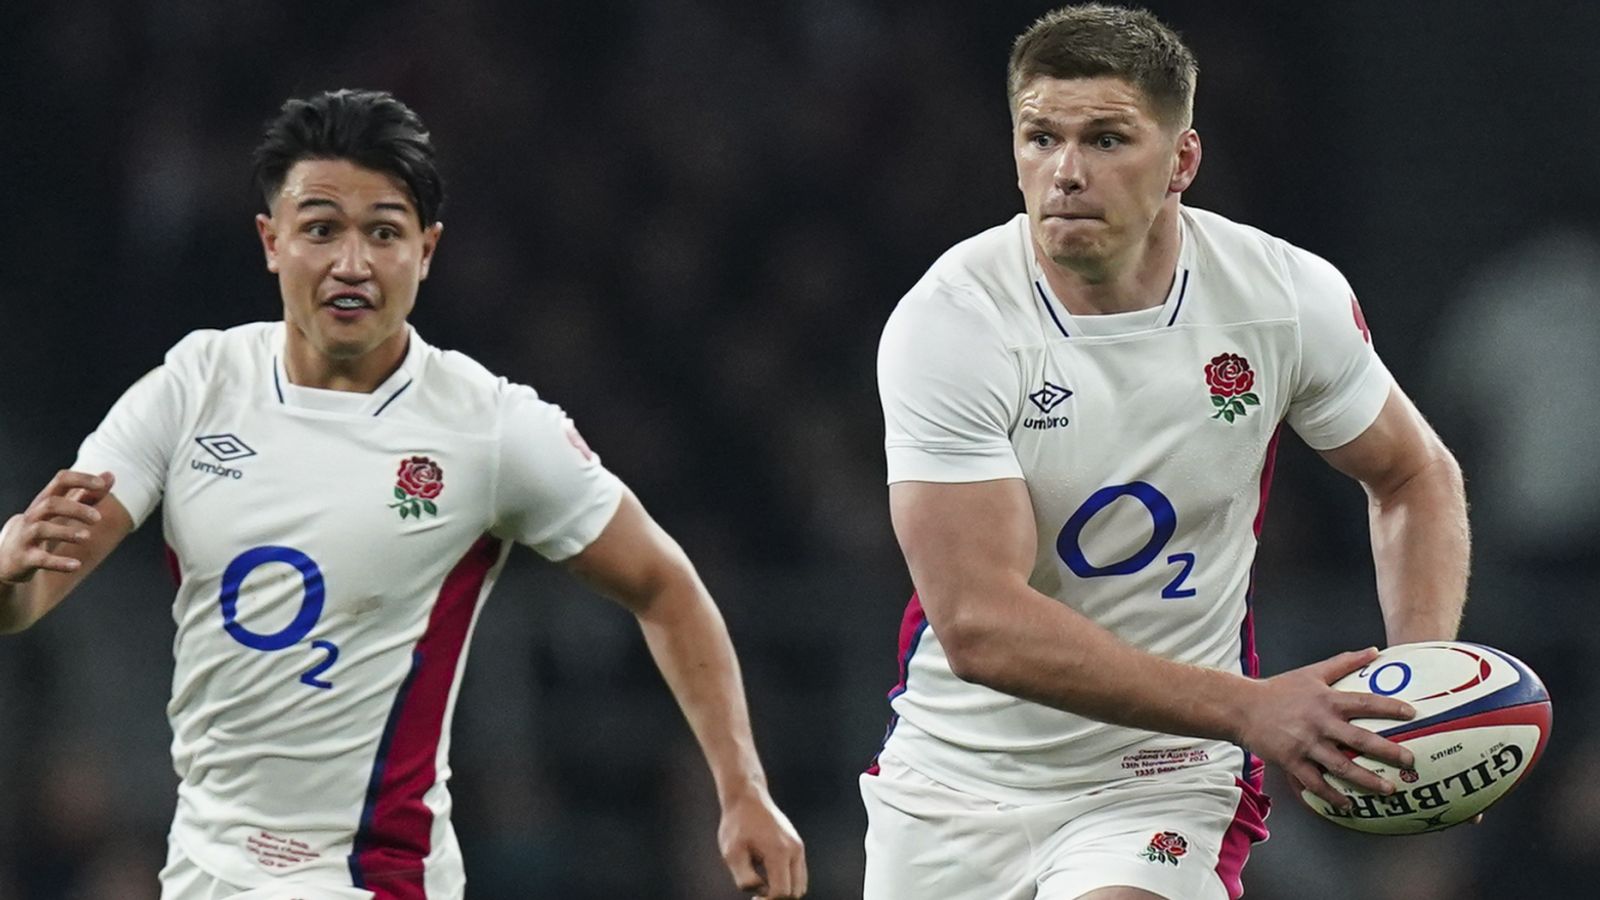 England captain Owen Farrell ruled out of Six Nations with ankle injury - Sky Sports